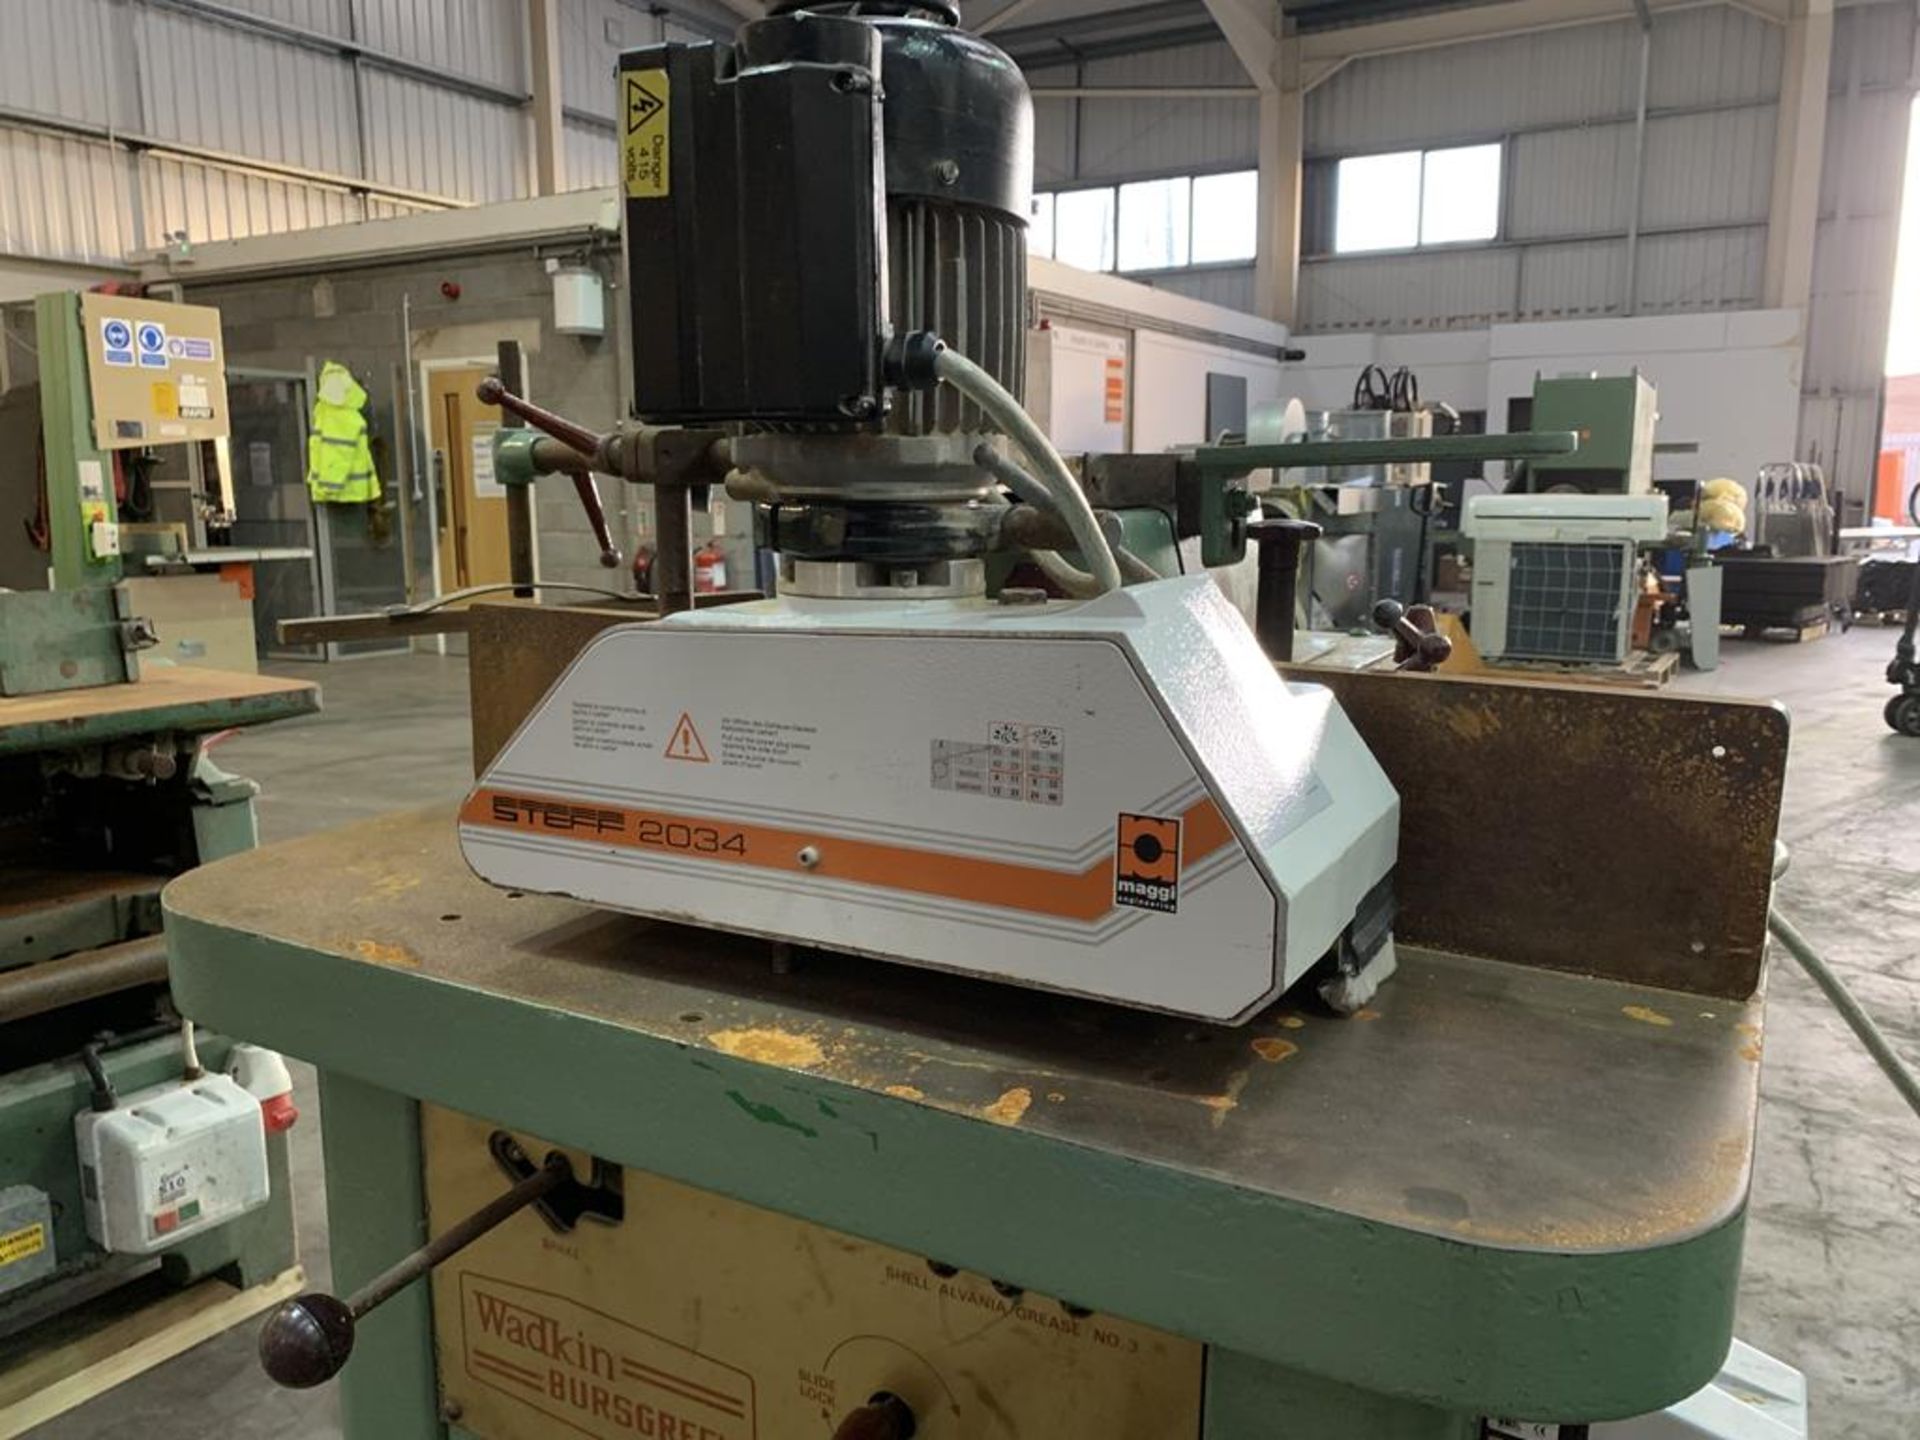 Wadkin Bursgreen BER3 Spindle Moulder with DC Brake and Steff 2034 Powered Roller Feed. 3phase - Image 3 of 10